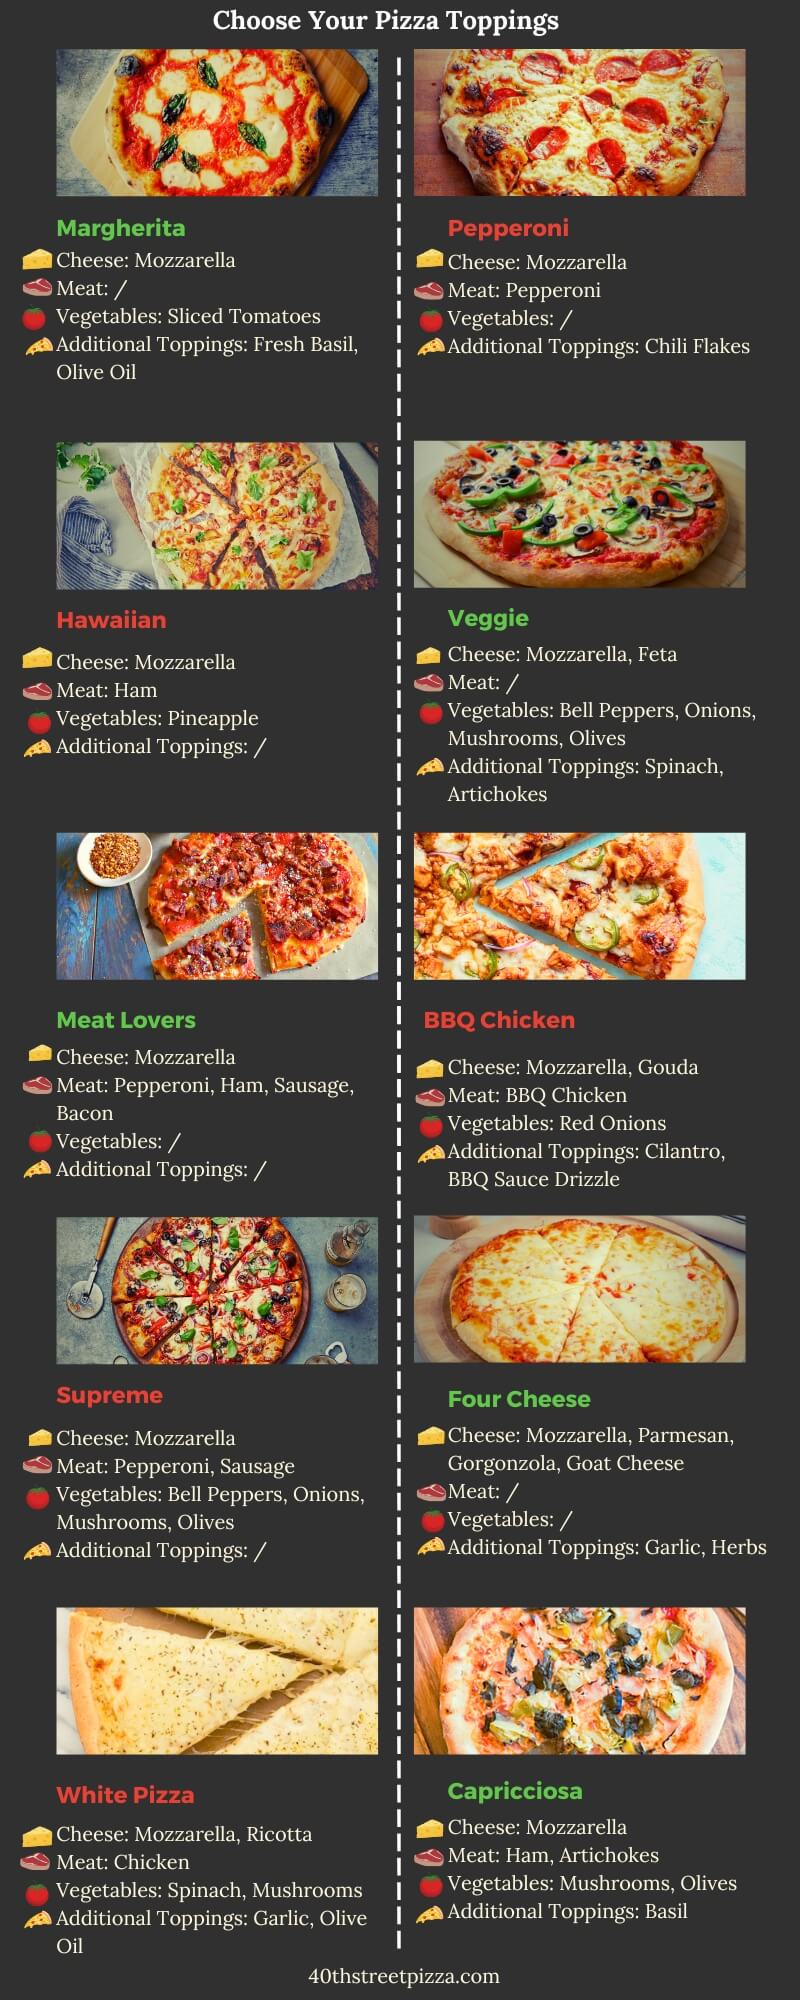 Illustration of pizza toppings